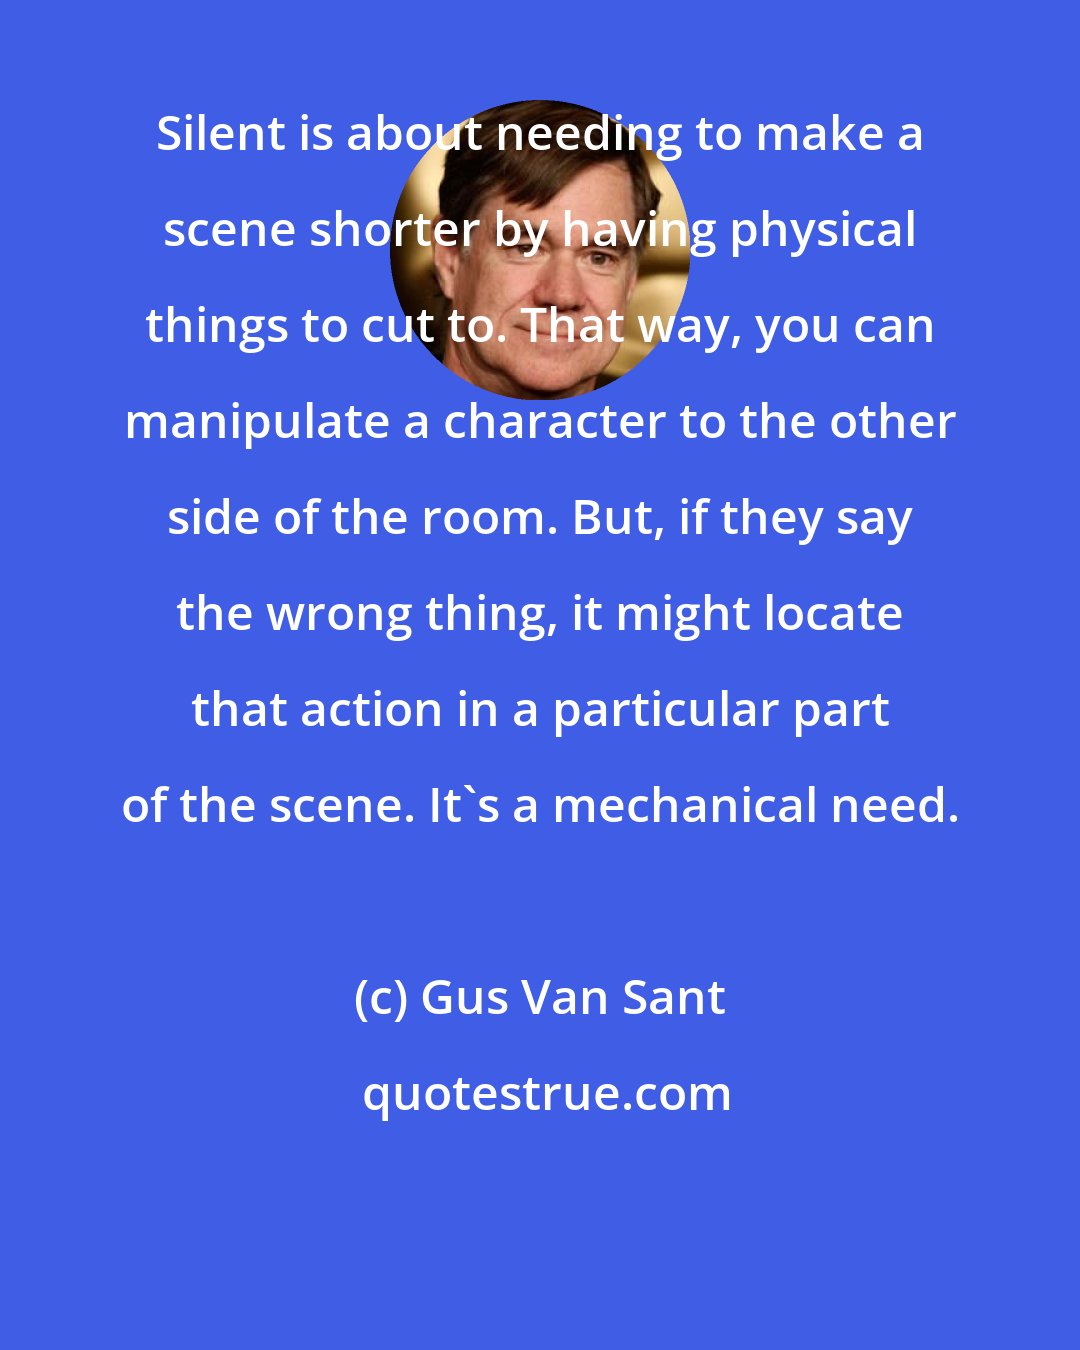 Gus Van Sant: Silent is about needing to make a scene shorter by having physical things to cut to. That way, you can manipulate a character to the other side of the room. But, if they say the wrong thing, it might locate that action in a particular part of the scene. It's a mechanical need.